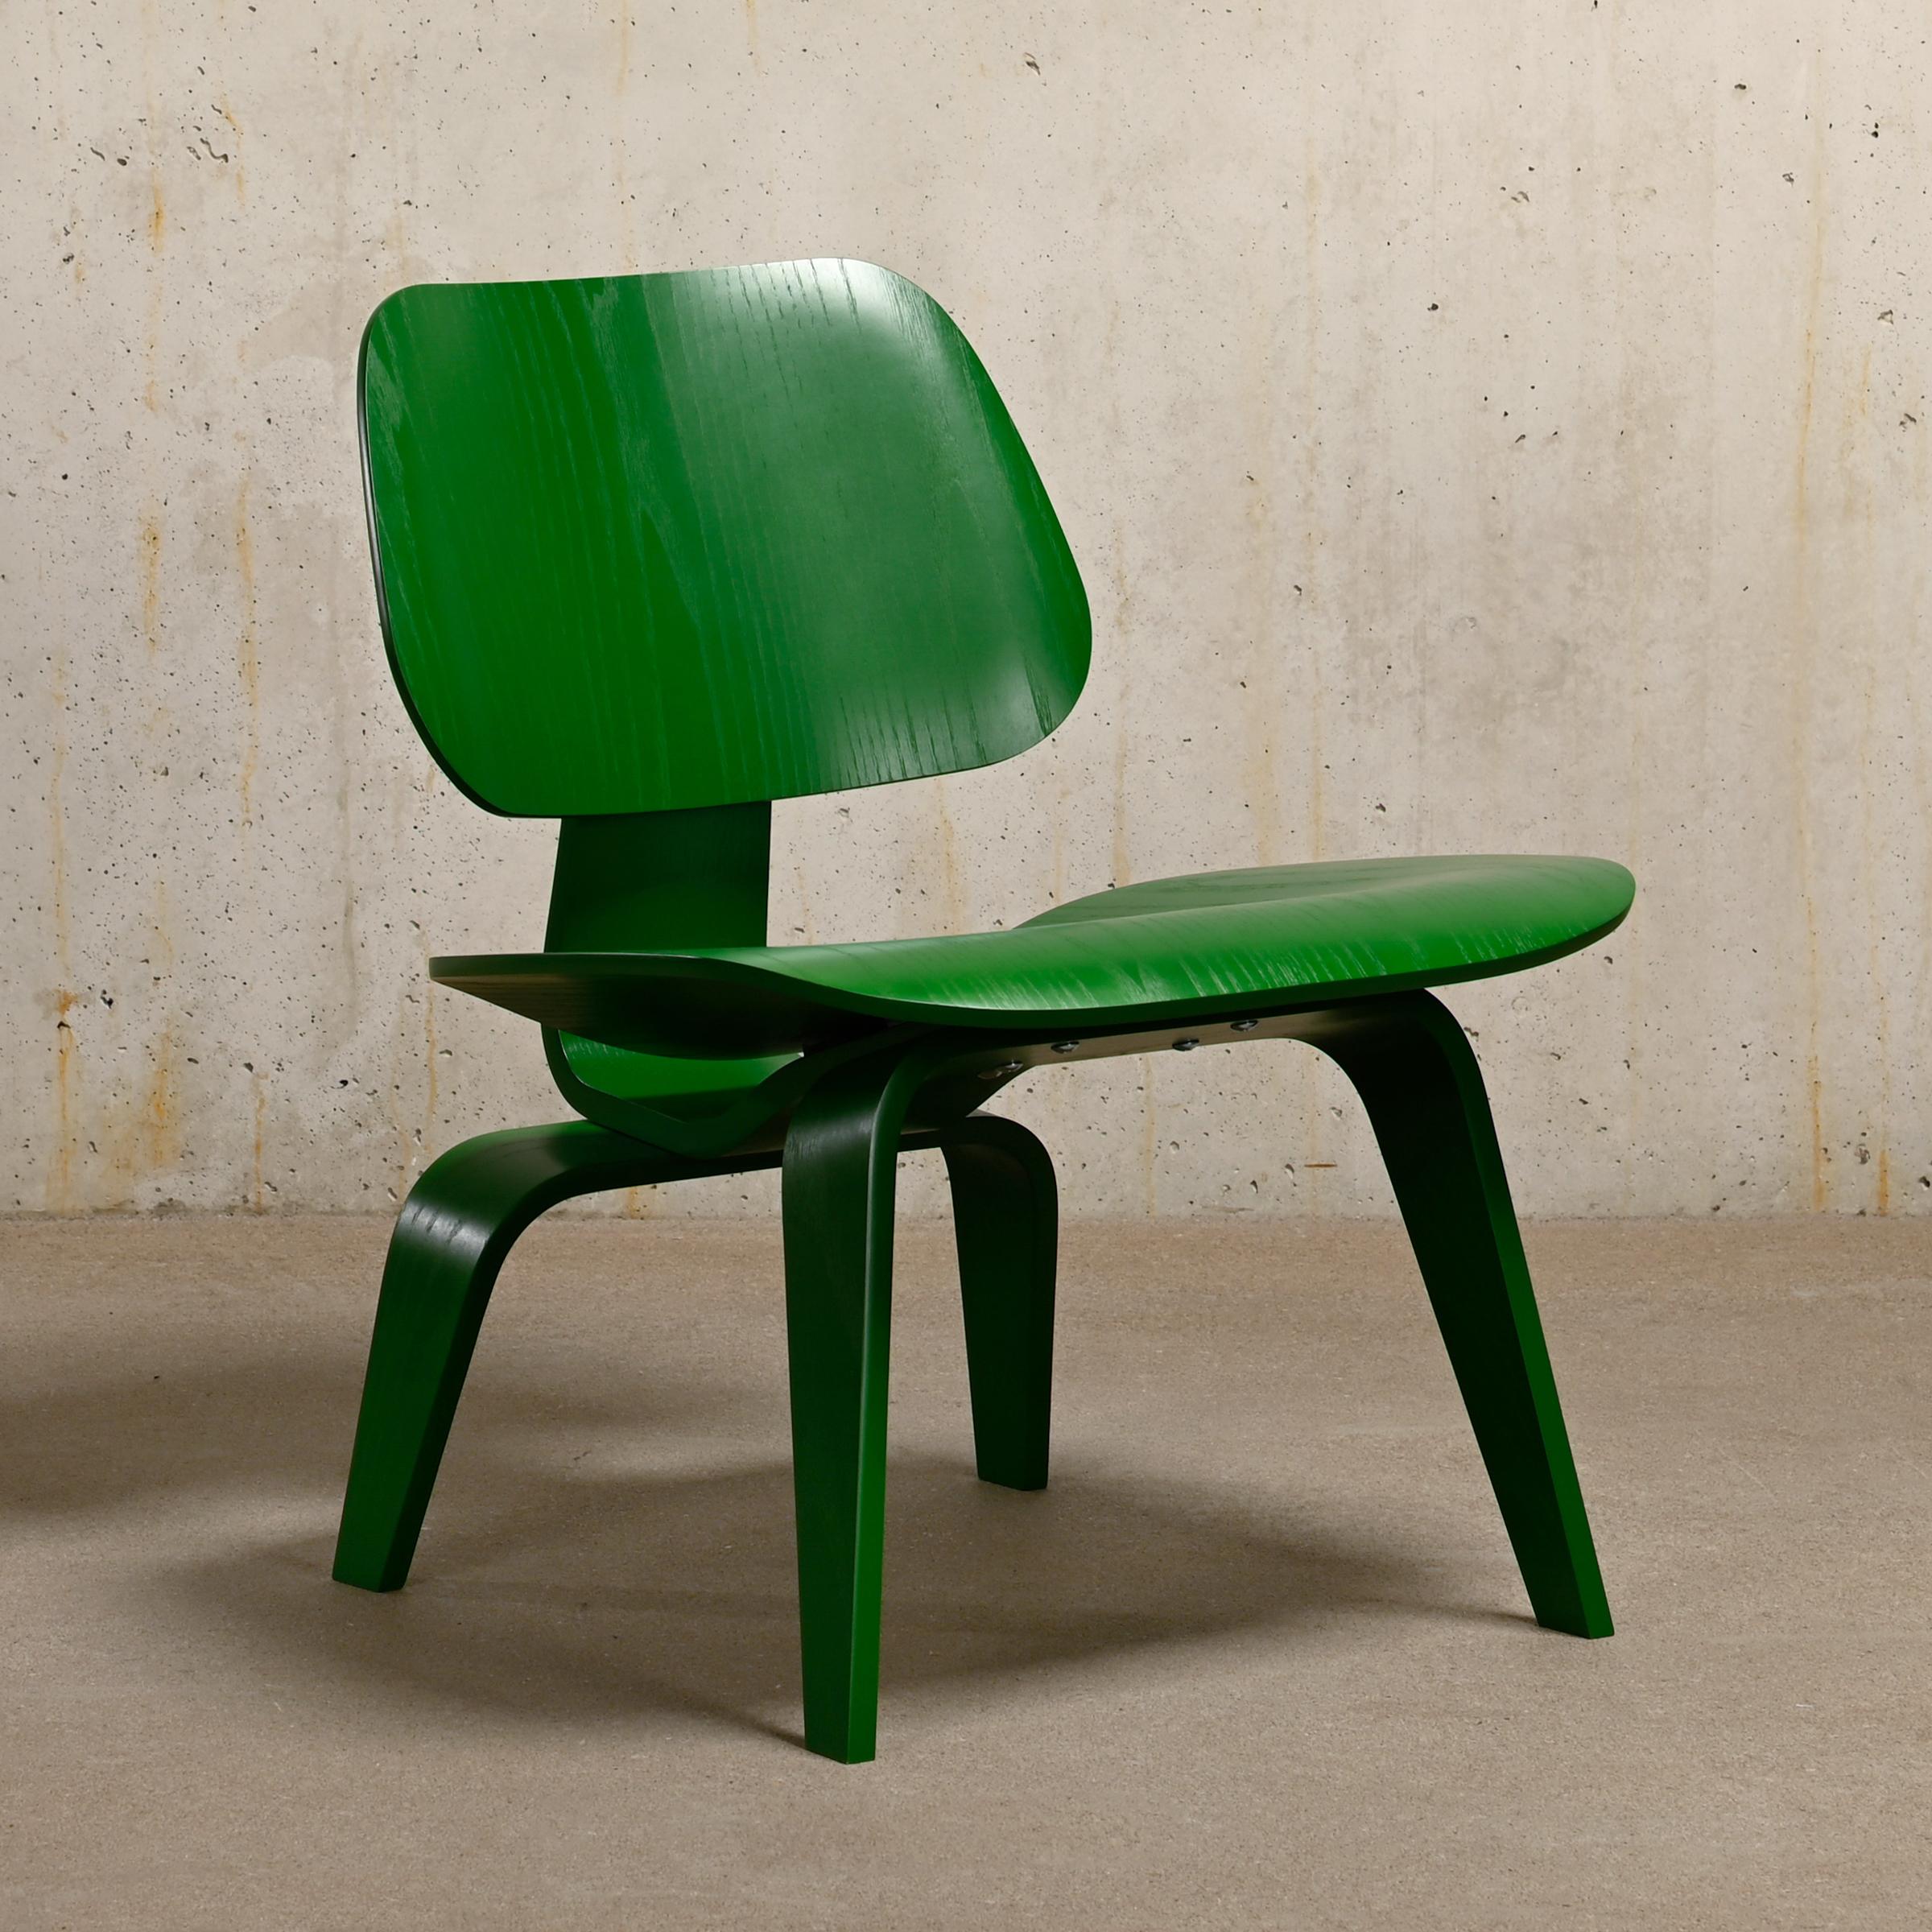 Mid-20th Century Charles & Ray Eames LCW Green HAY collection Lounge Chair for Herman Miller